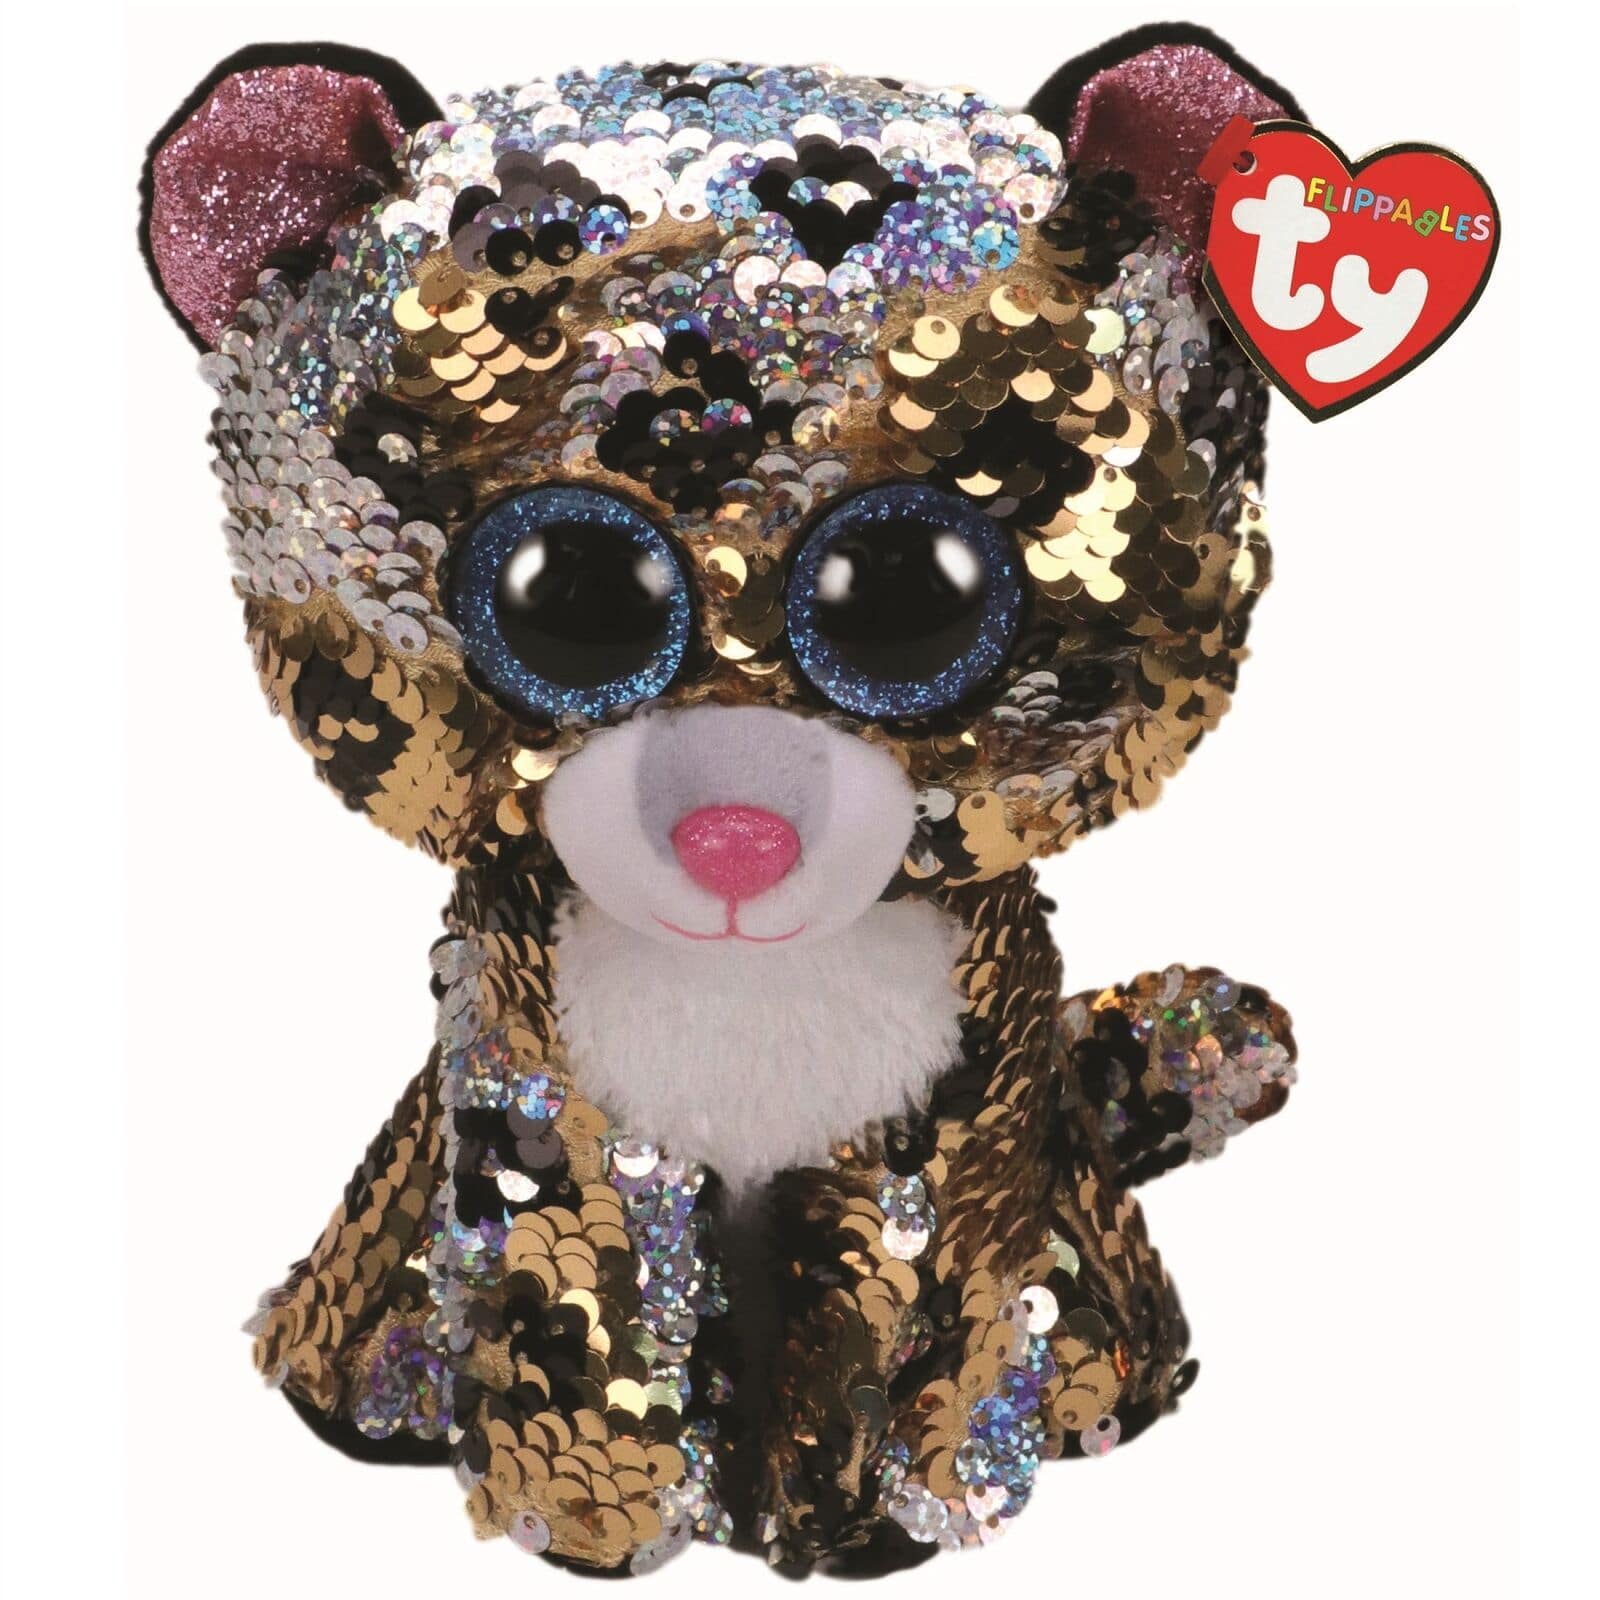 Plush Ty Beanie Boos Flippables Sterling Sequin Leopard 24cm - Albagame